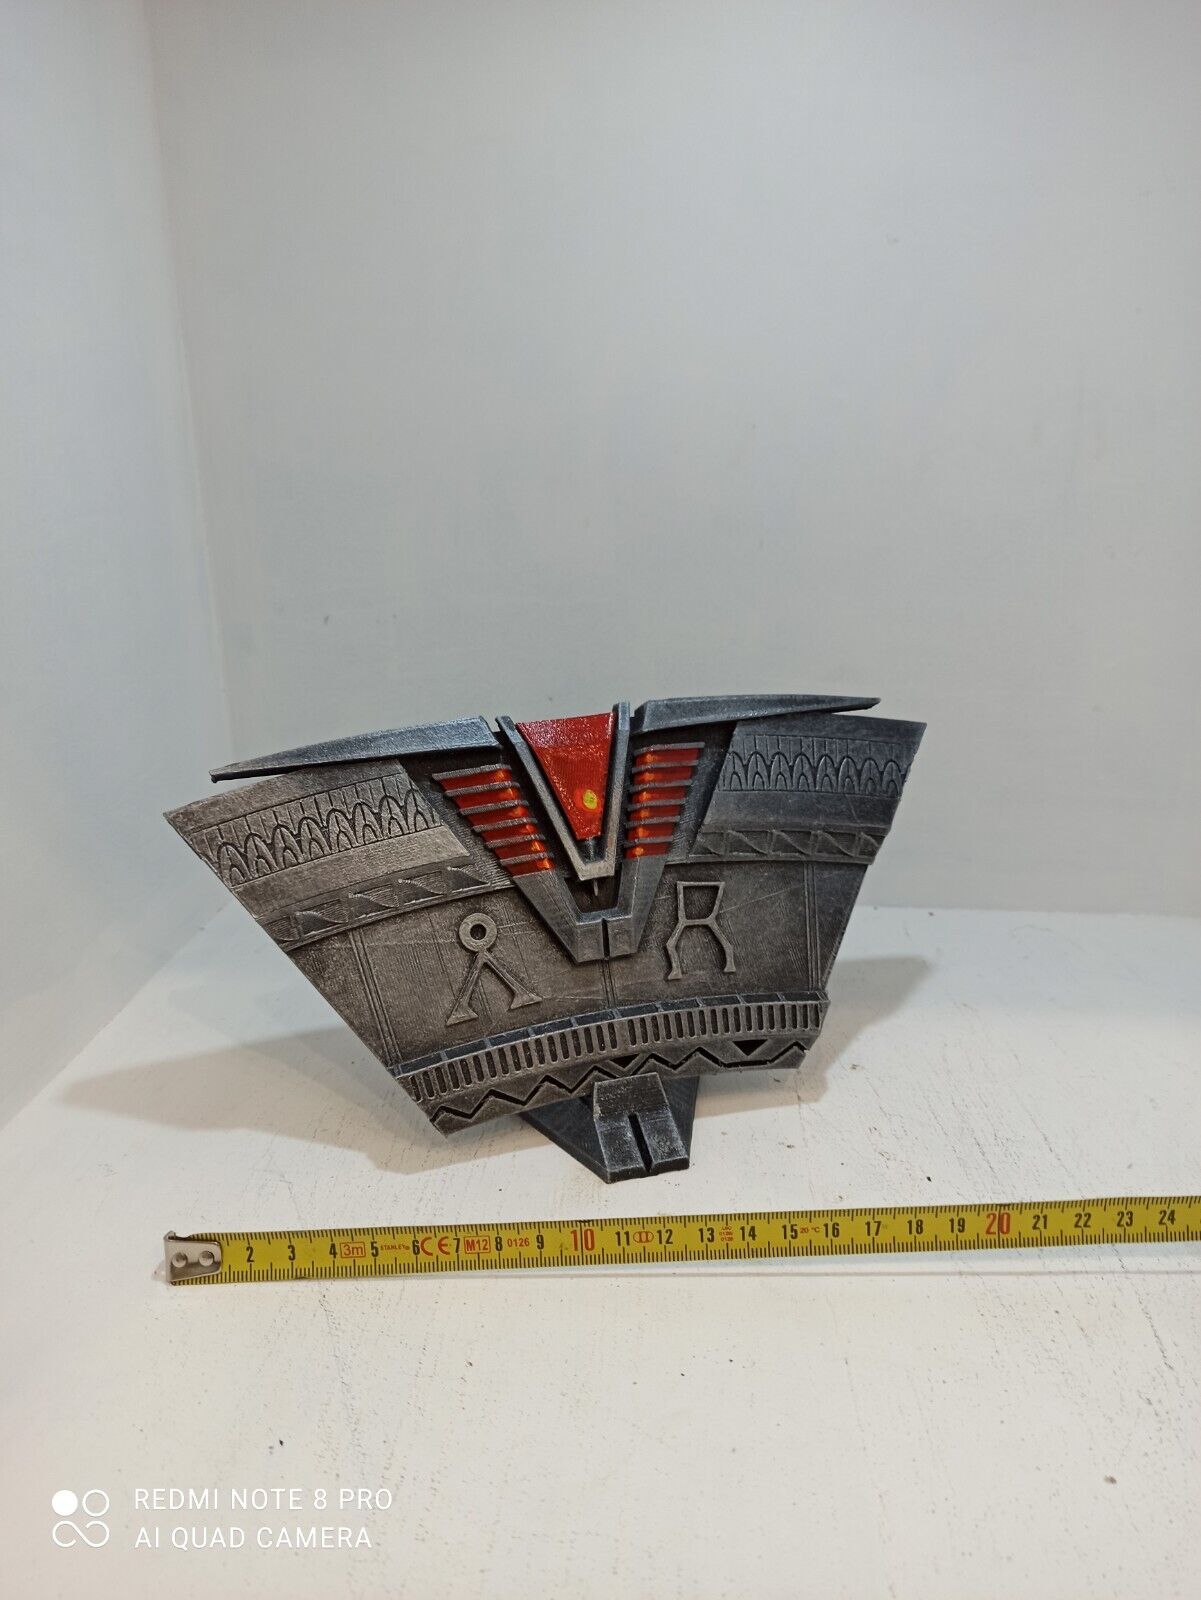 Stargate SG1 model for display collectible